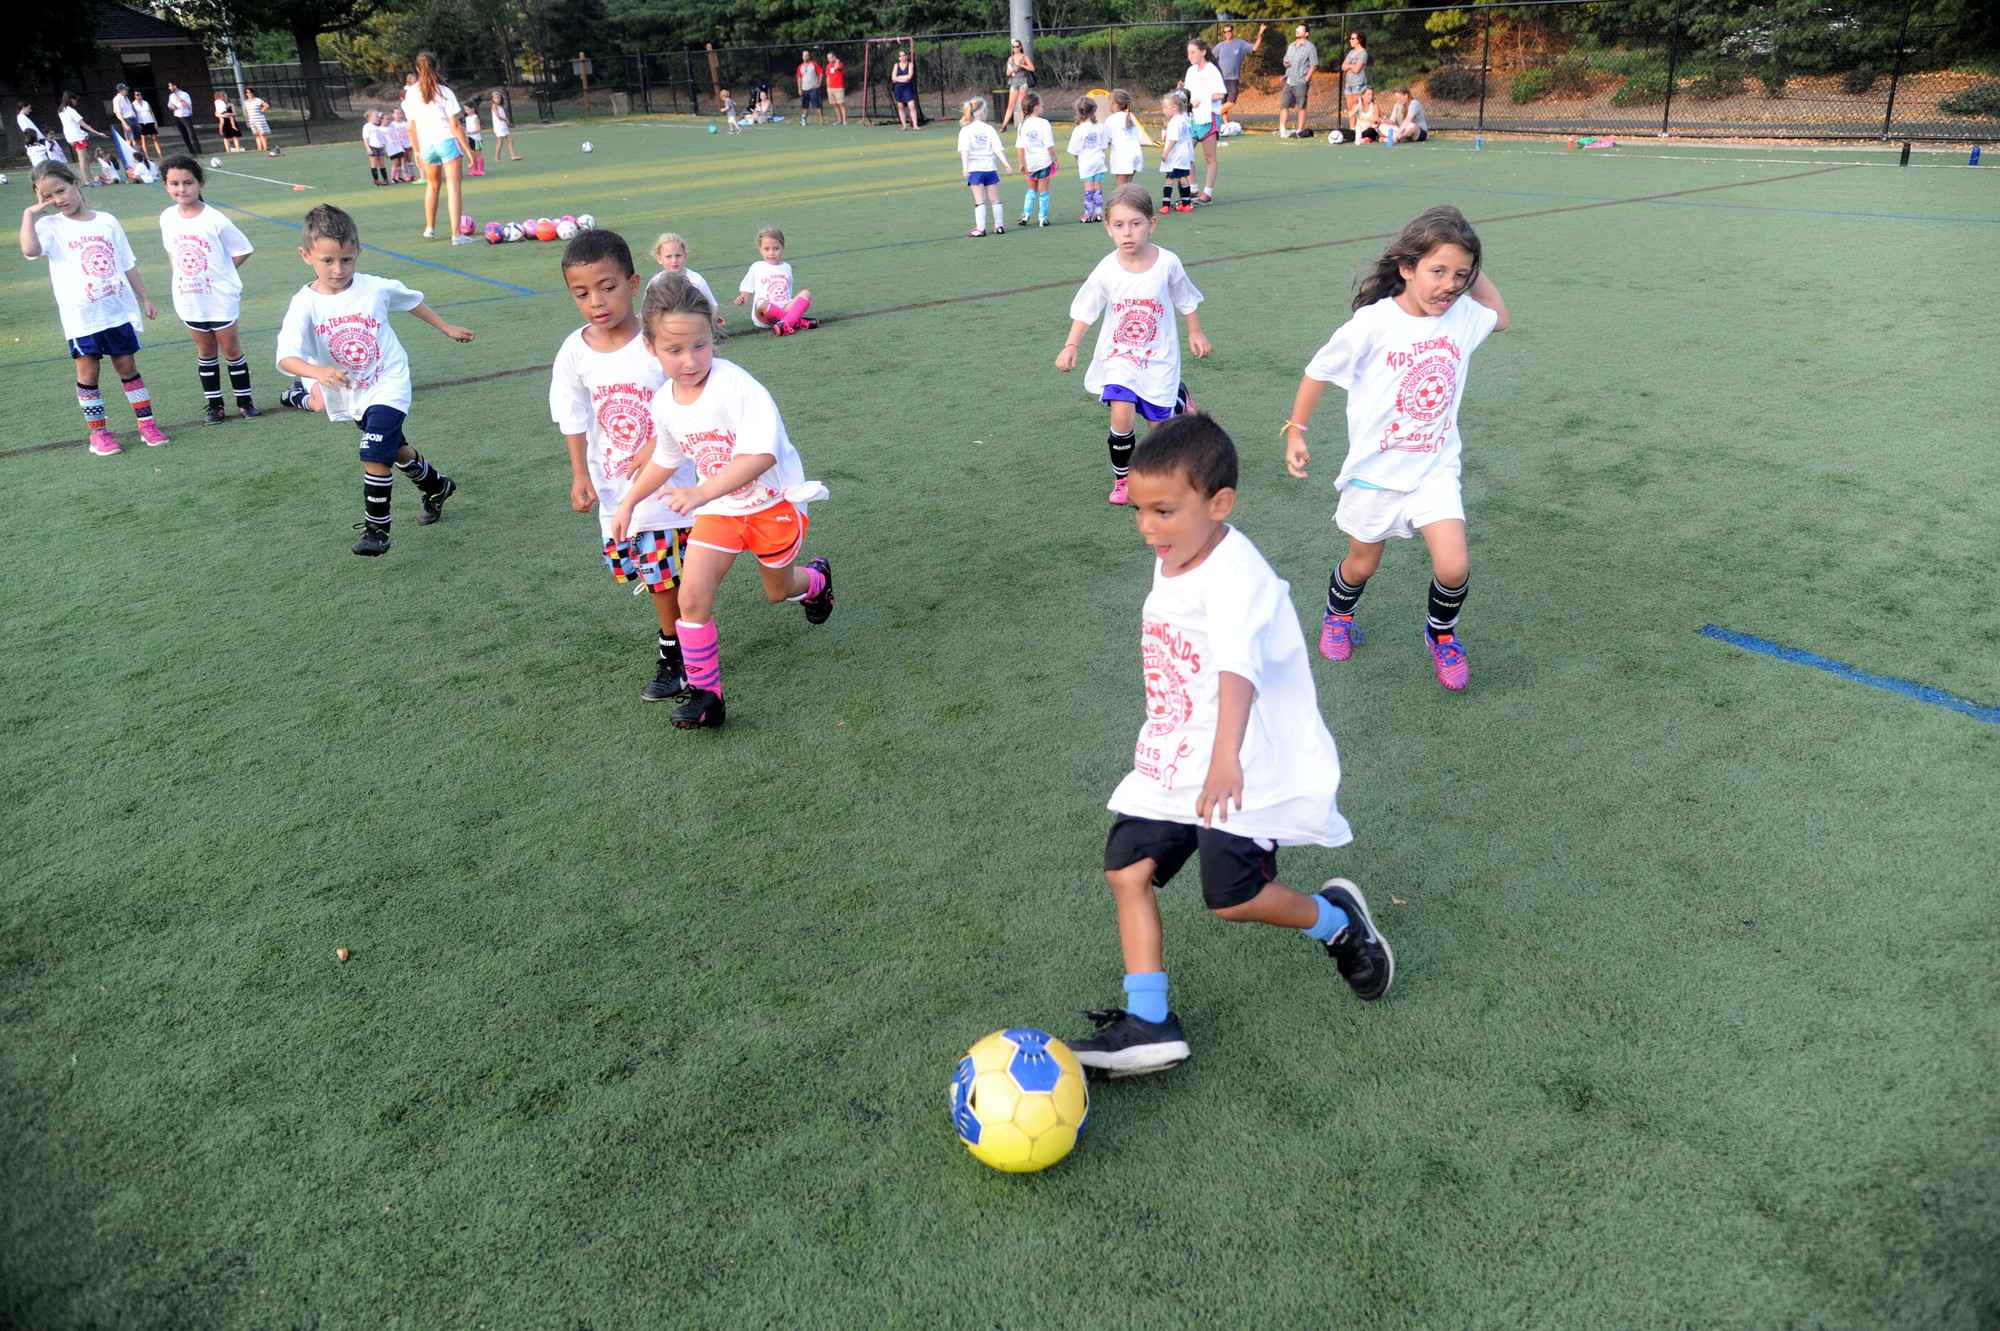 The kids also had the opportunity to play with each other and practice the skills that the older players taught them.